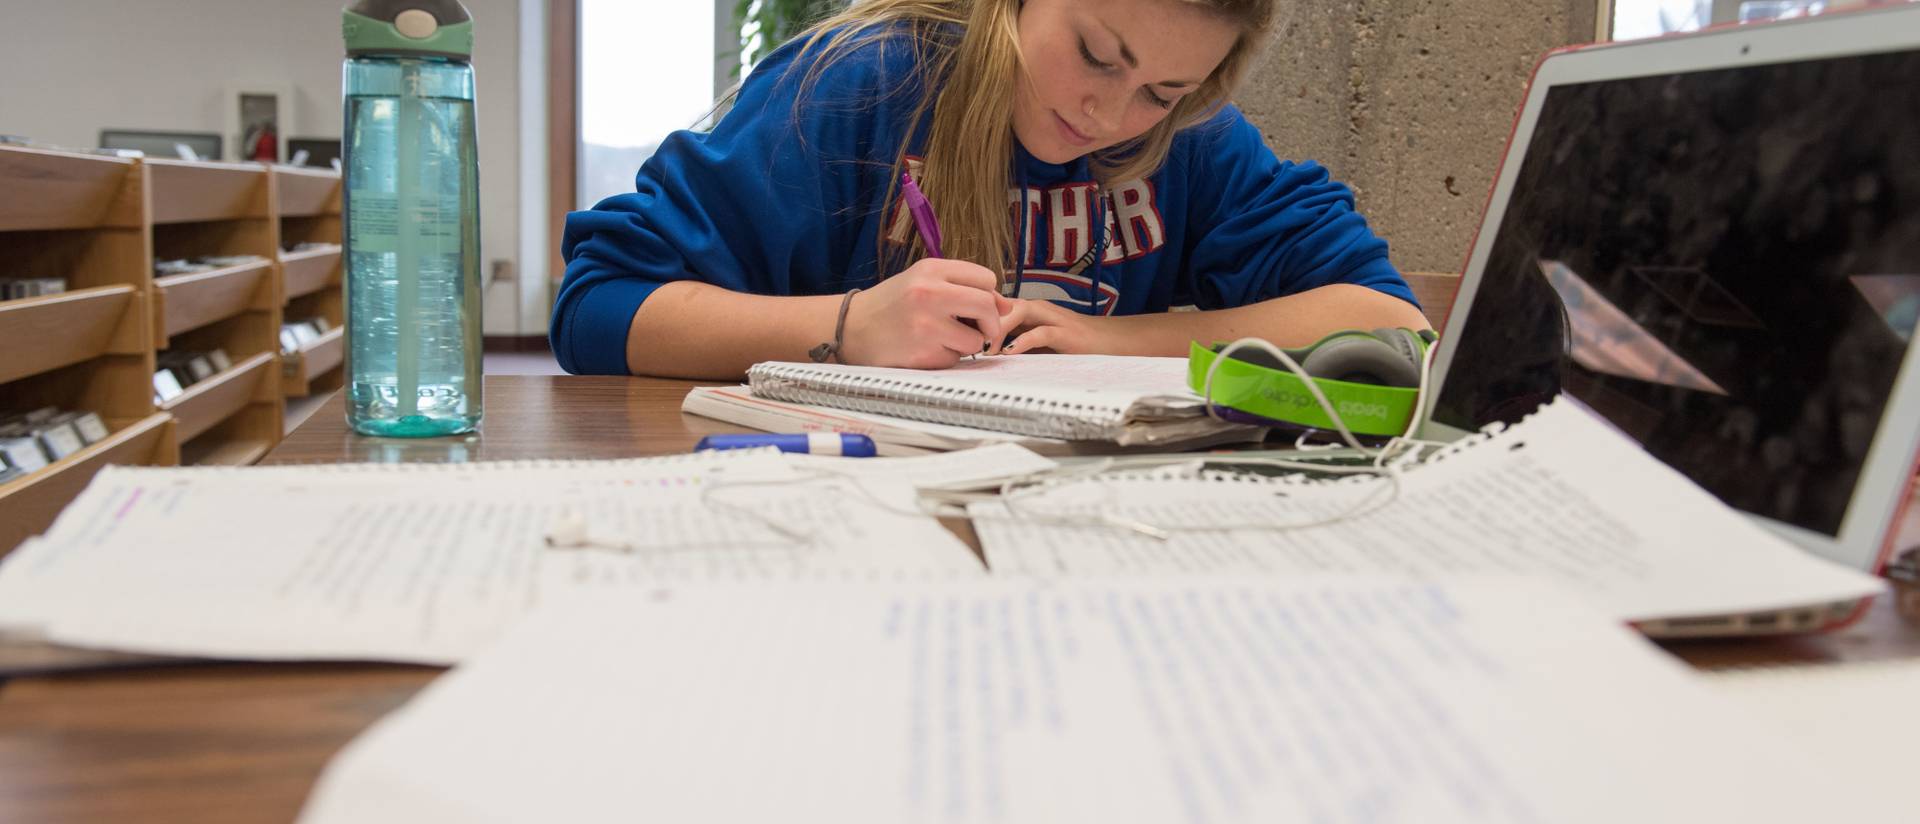 A student covers a desk with notes as the study during finals week.